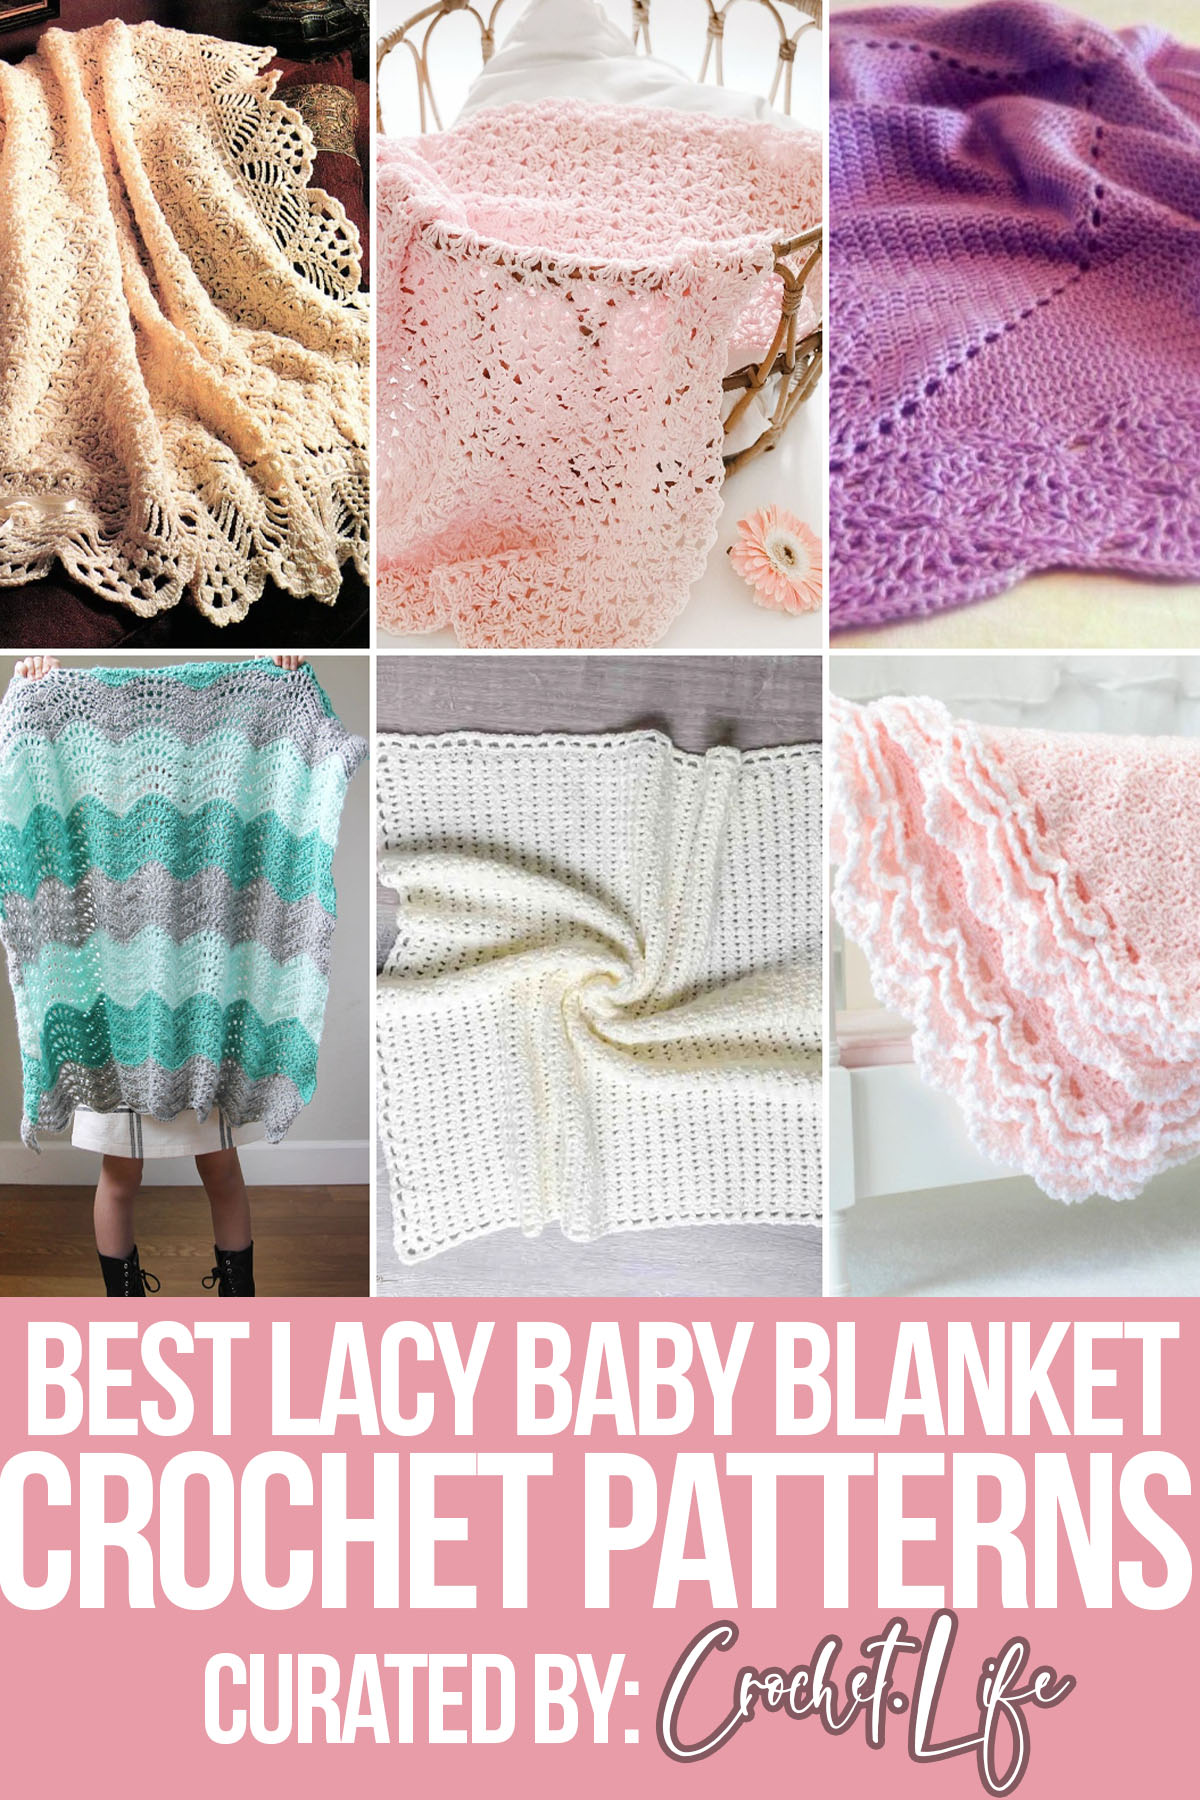 photo collage of crochet patterns for lacy baby blanket with text which reads best lacy baby blanket crochet patterns curated by crochet.life